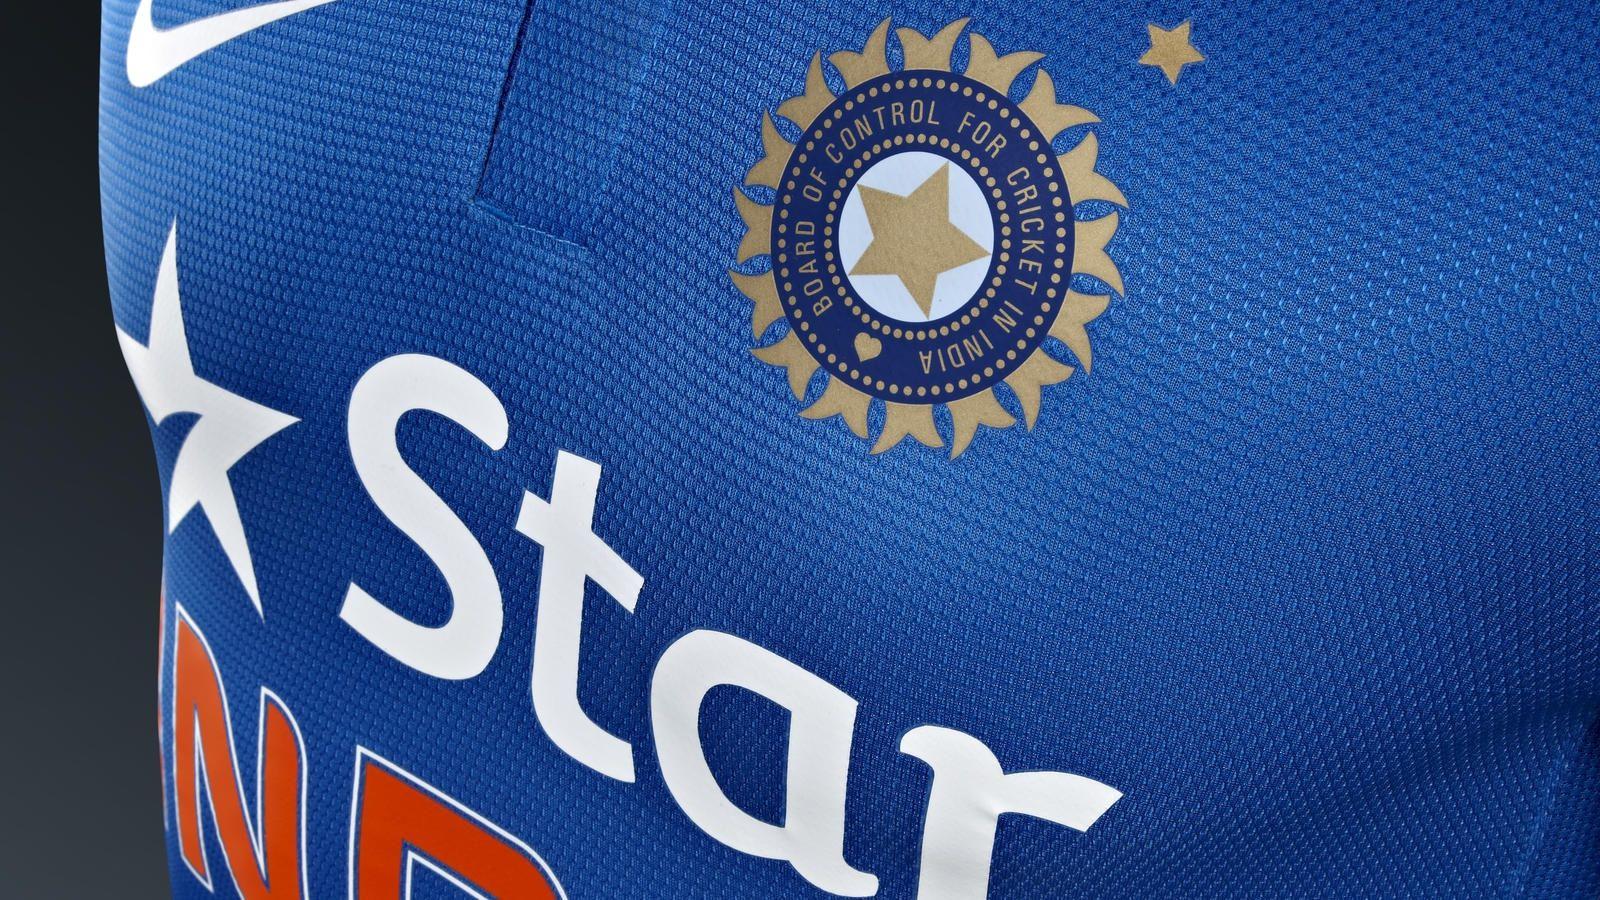 BCCI looking to lock value with longterm lead sponsors  Cricket   Hindustan Times